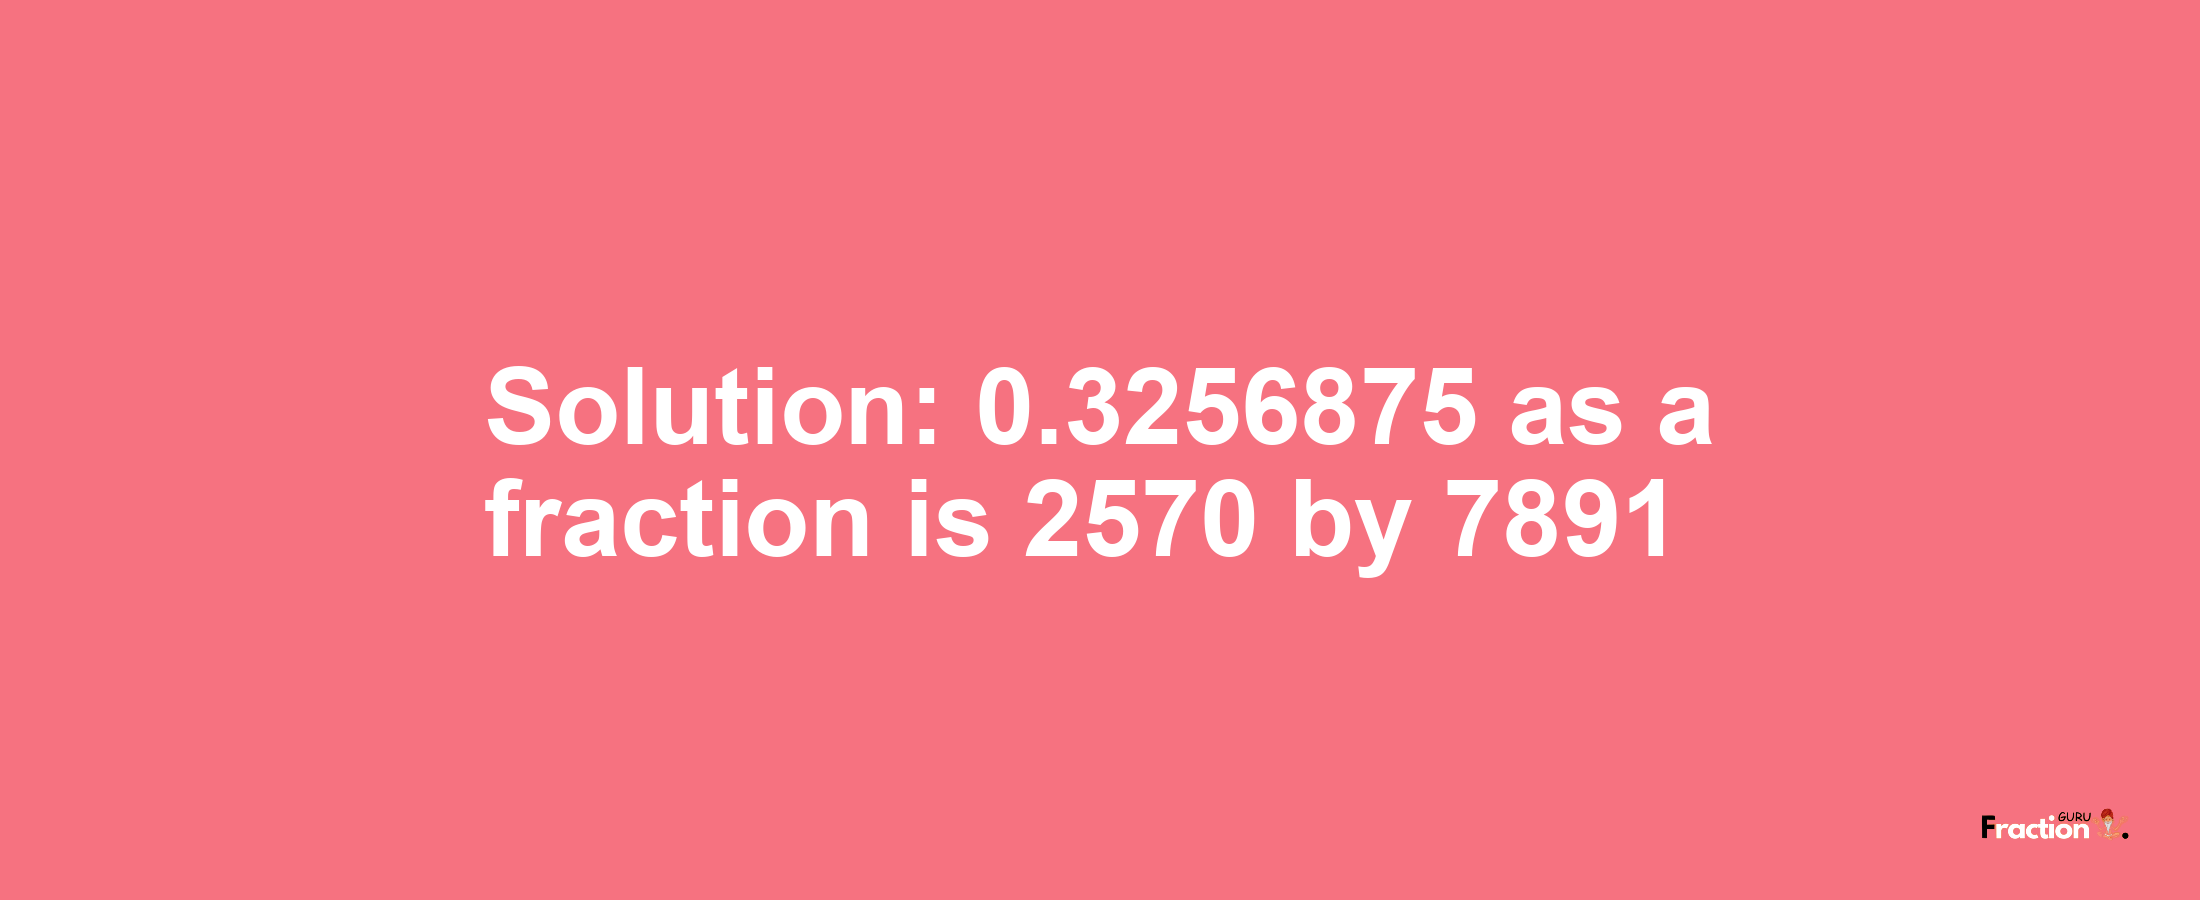 Solution:0.3256875 as a fraction is 2570/7891